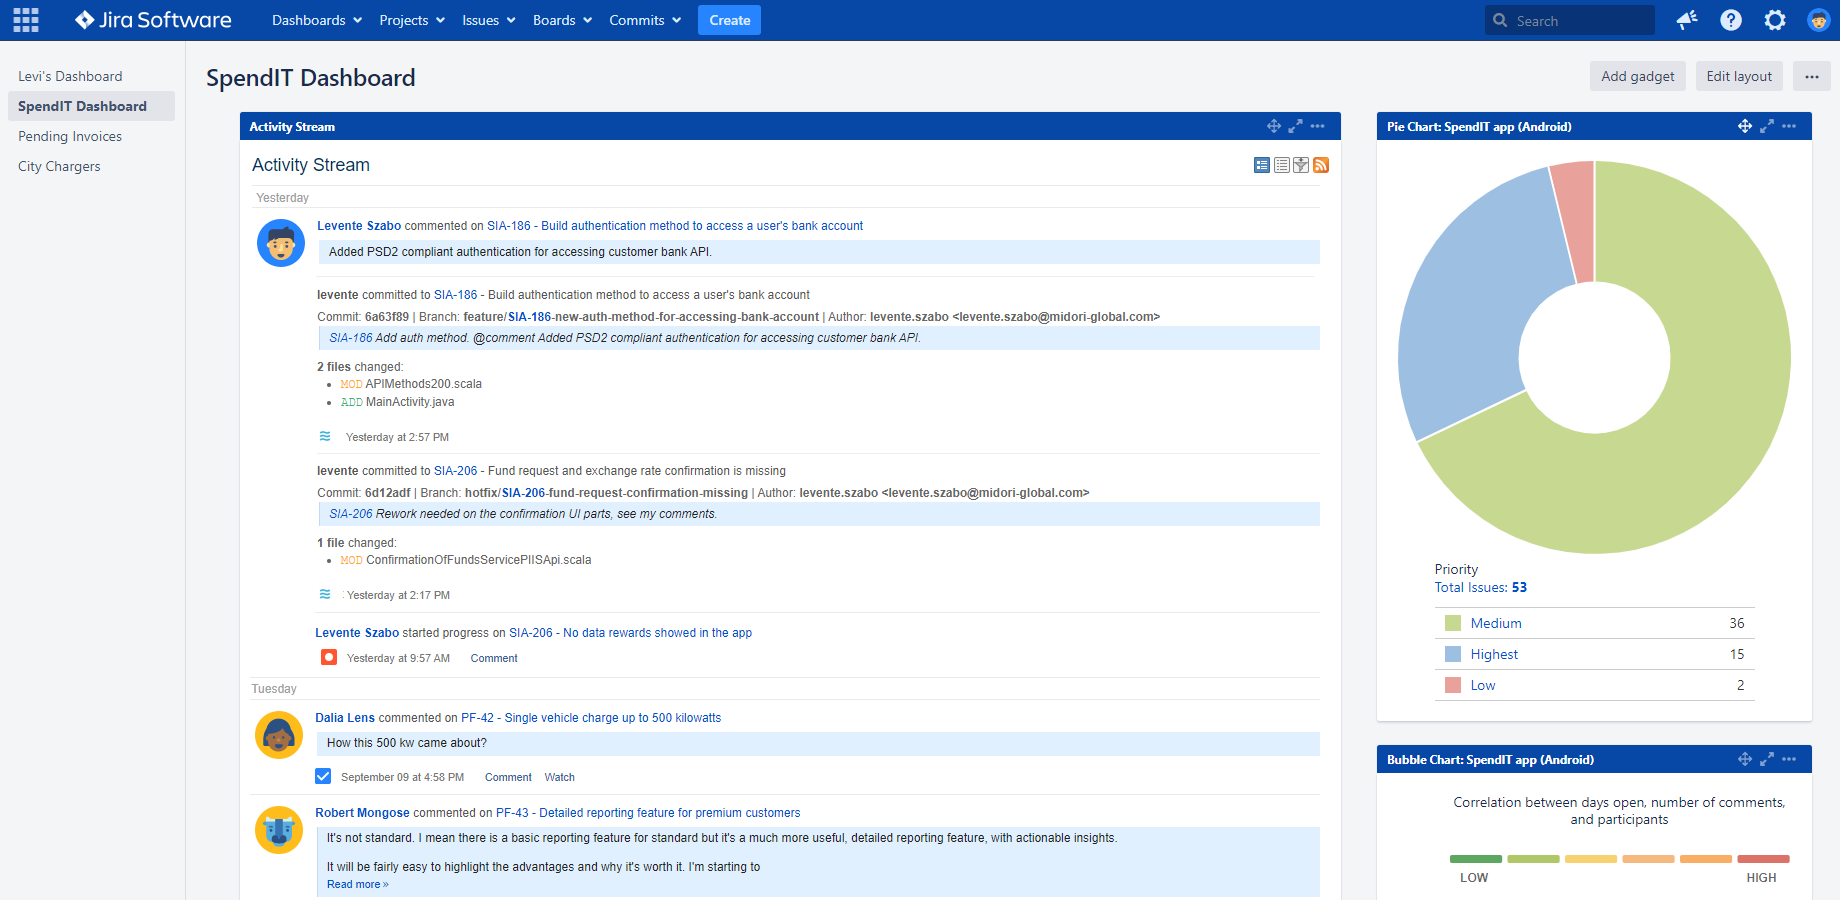 Code commit information posted in the Jira activity stream dashboard gadget